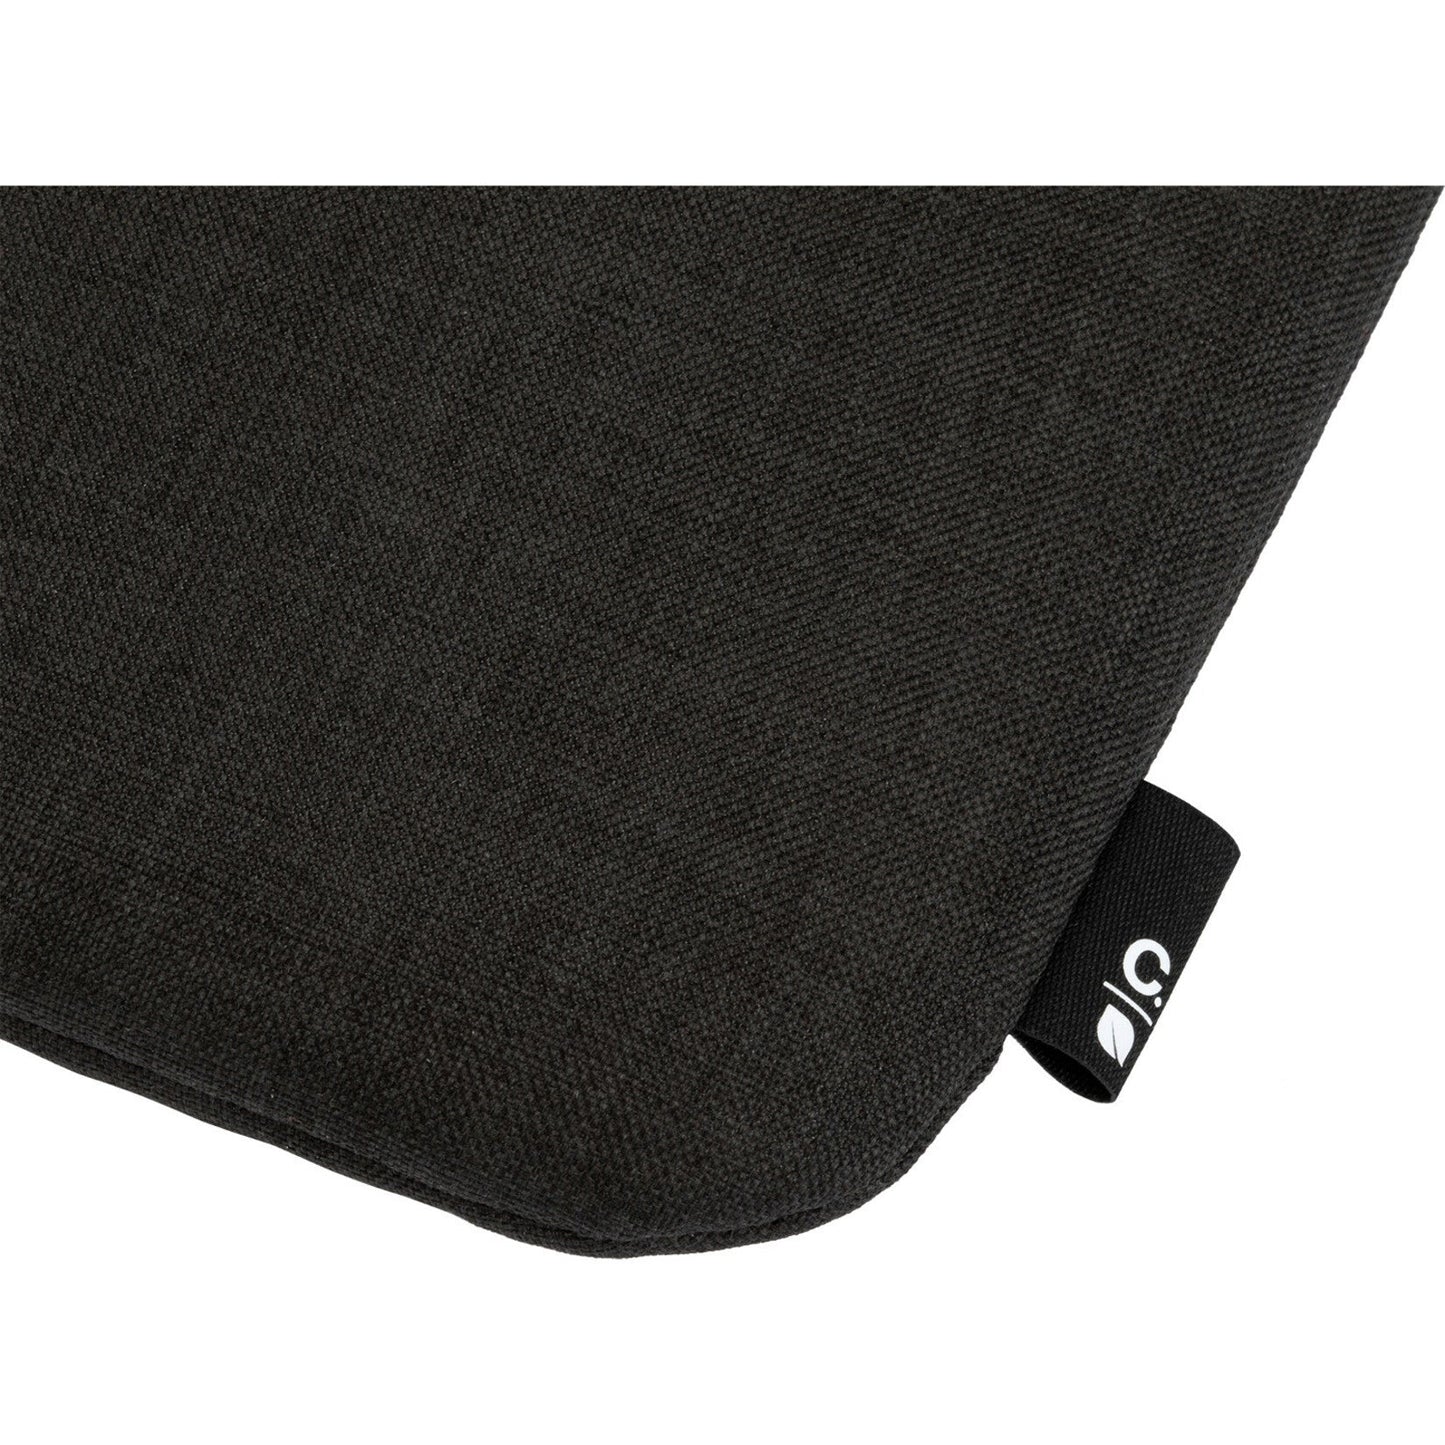 Incase Carrying Case (Sleeve) for 13" Notebook - Graphite